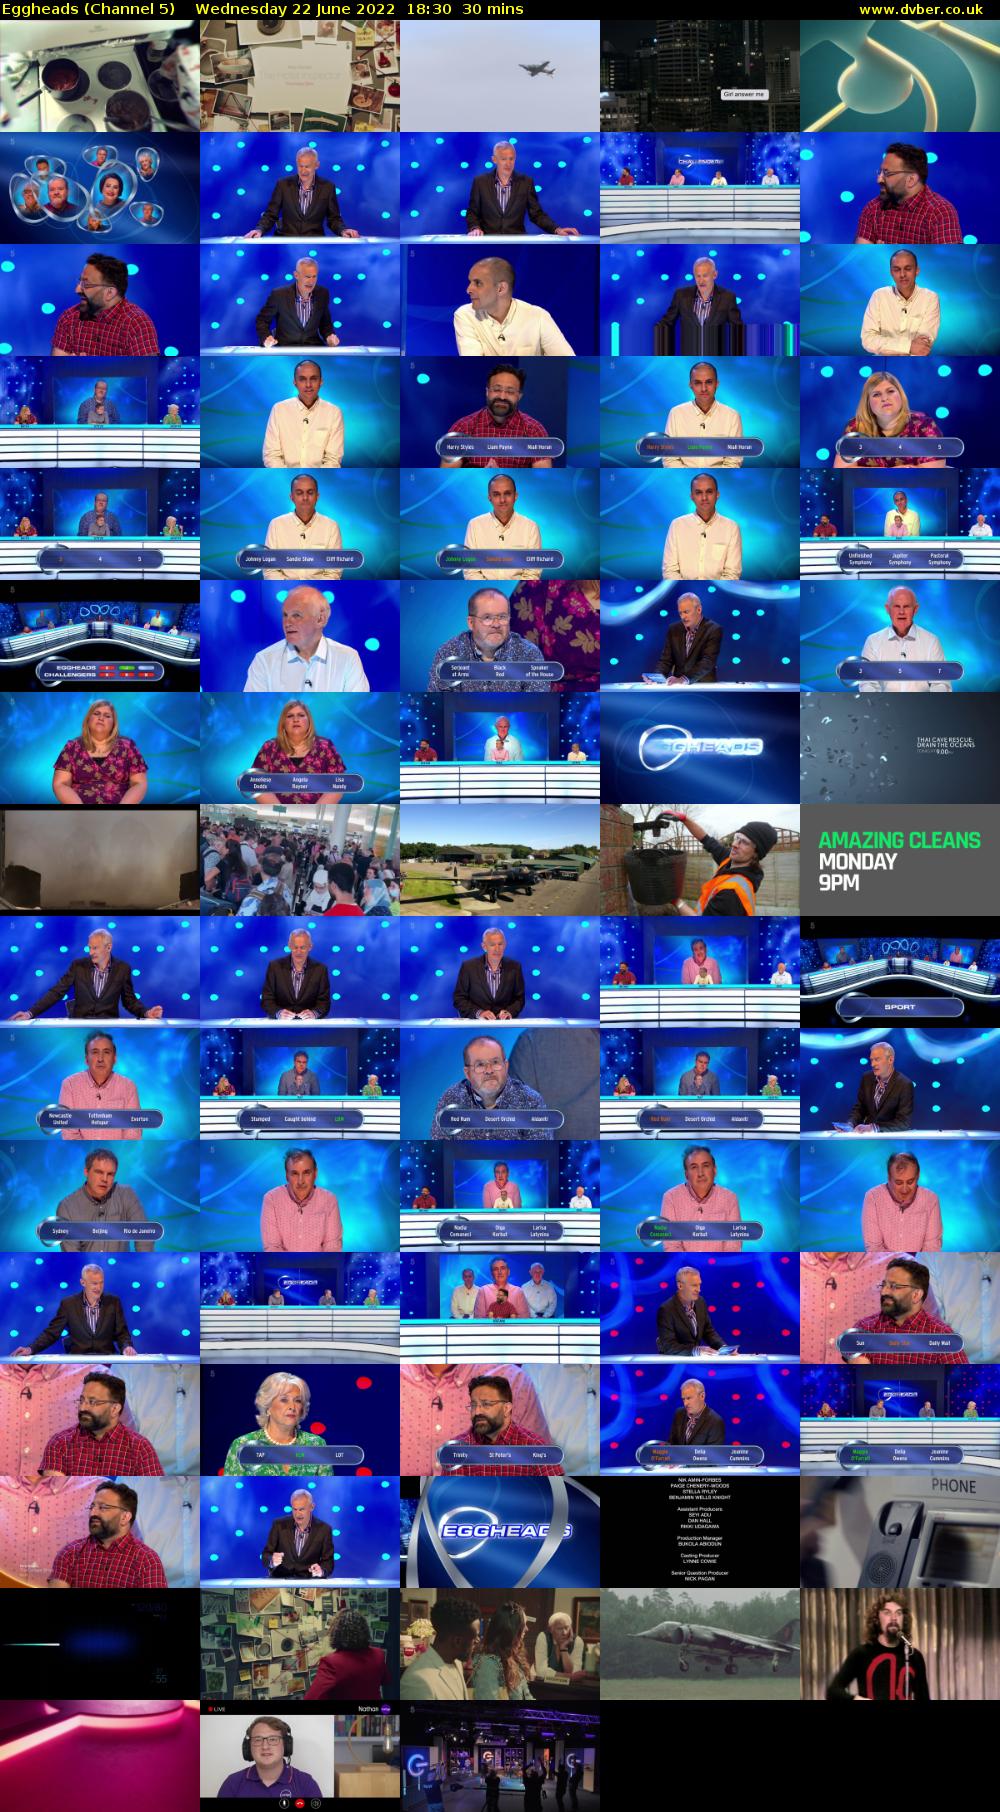 Eggheads (Channel 5) Wednesday 22 June 2022 18:30 - 19:00